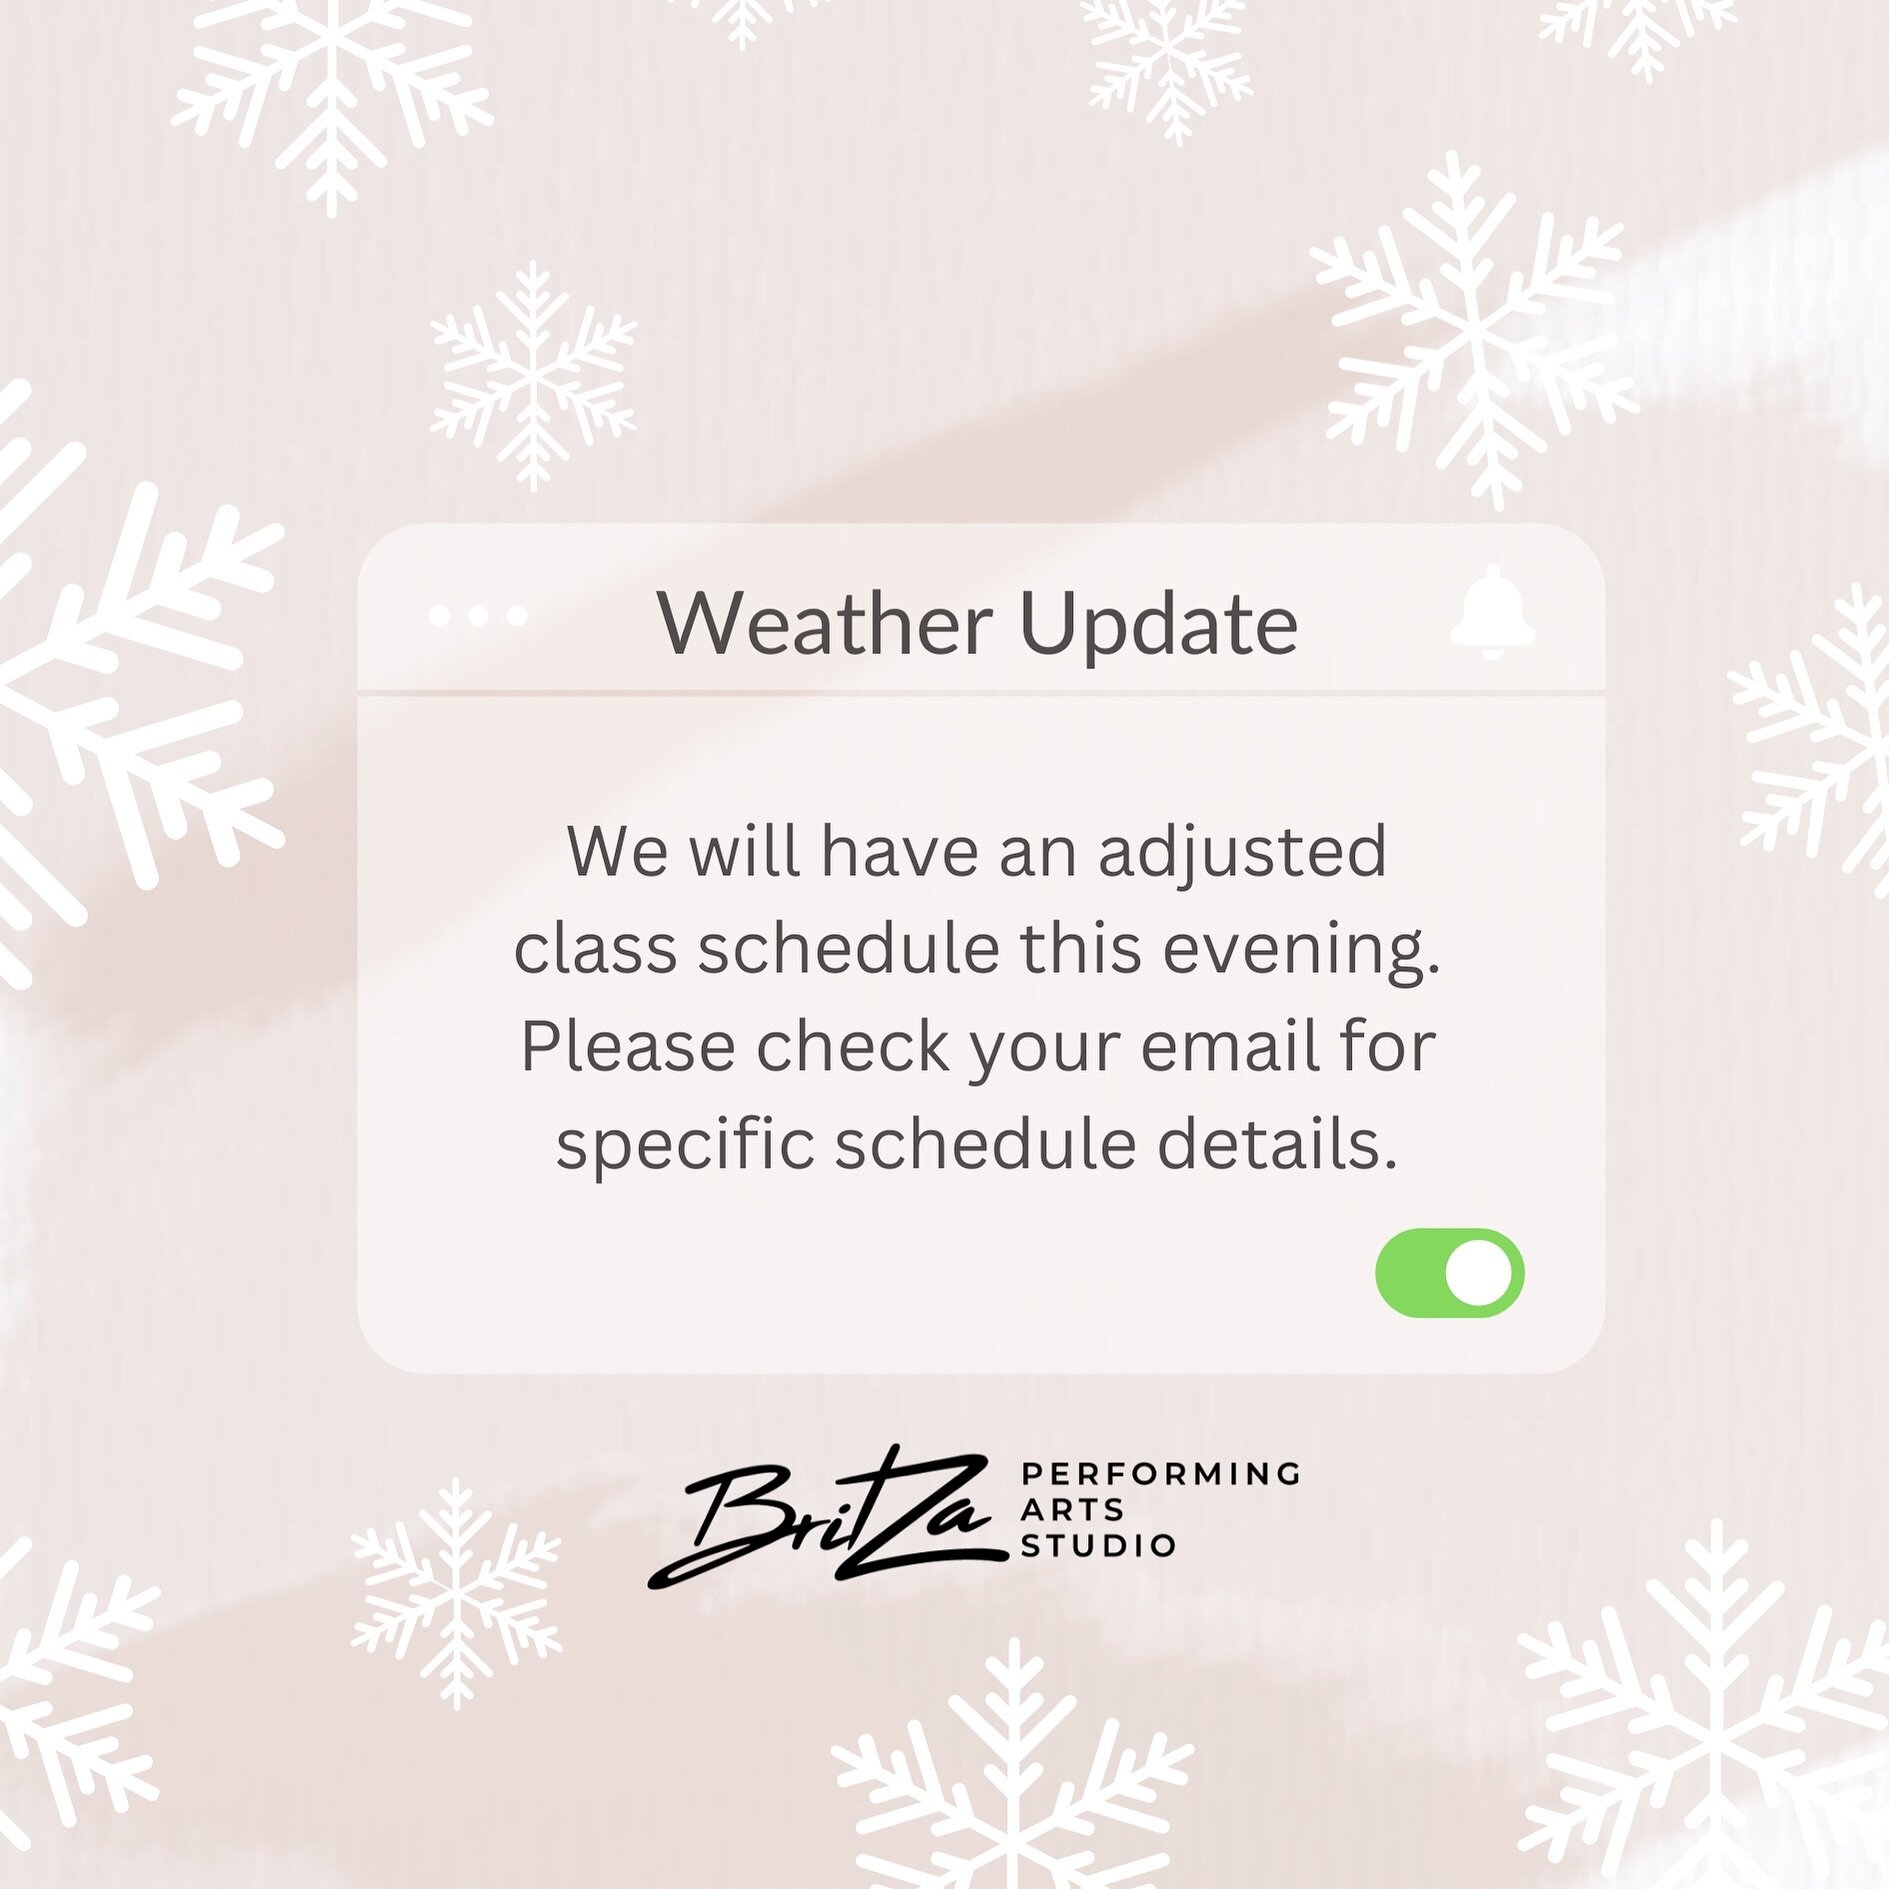 With the uncertain weather, we will have an adjusted class schedule this evening. Please check your emails for specific class details. The adjustment ensures all classes are done before 7:00 to allow our students and families to get home safely.